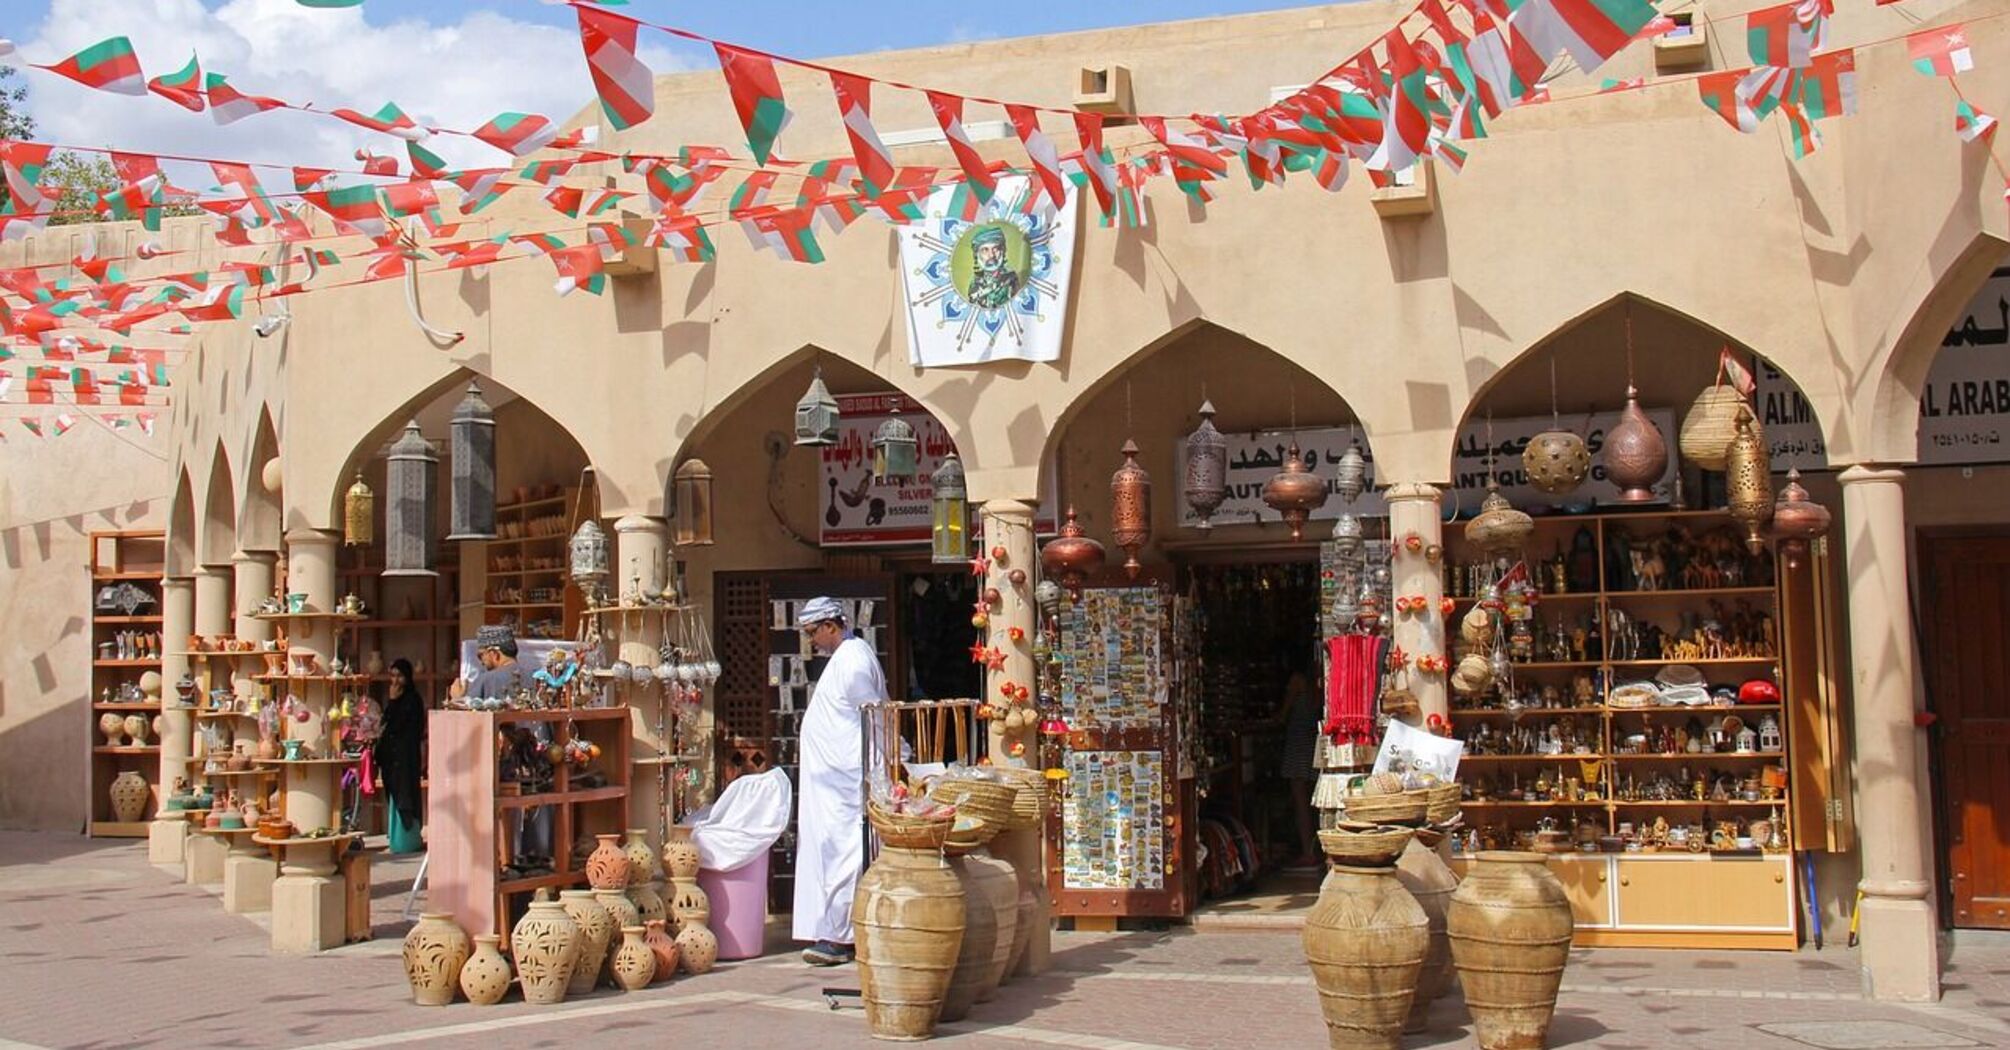 Souvenirs from Oman: what to bring back from your trip